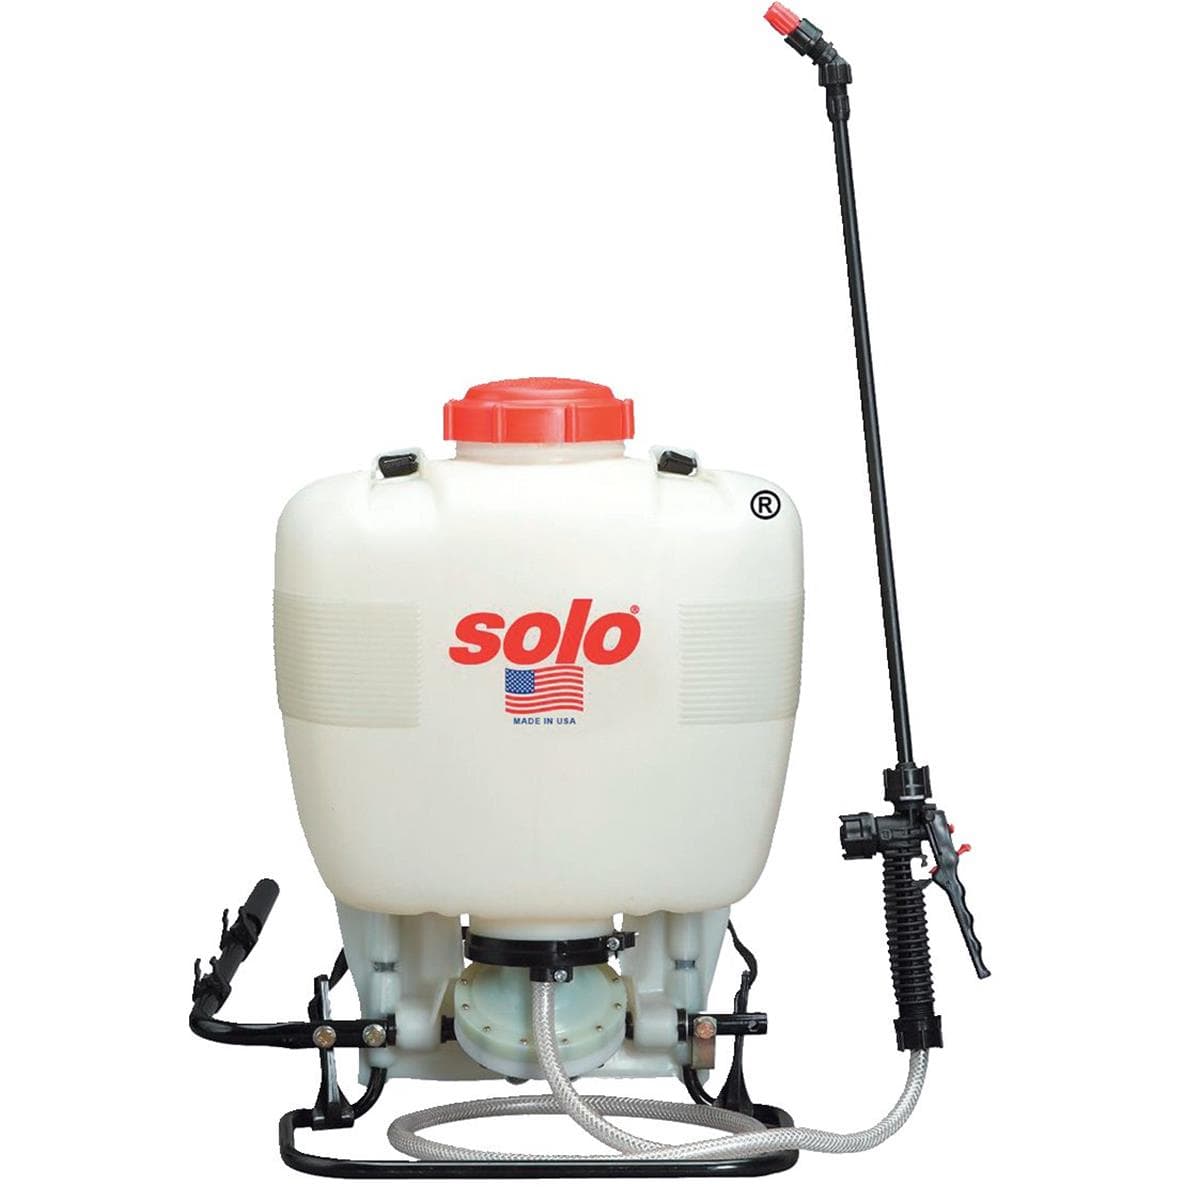 Solo 4-gal. Standard Backpack Sprayer with Diaphragm Pump